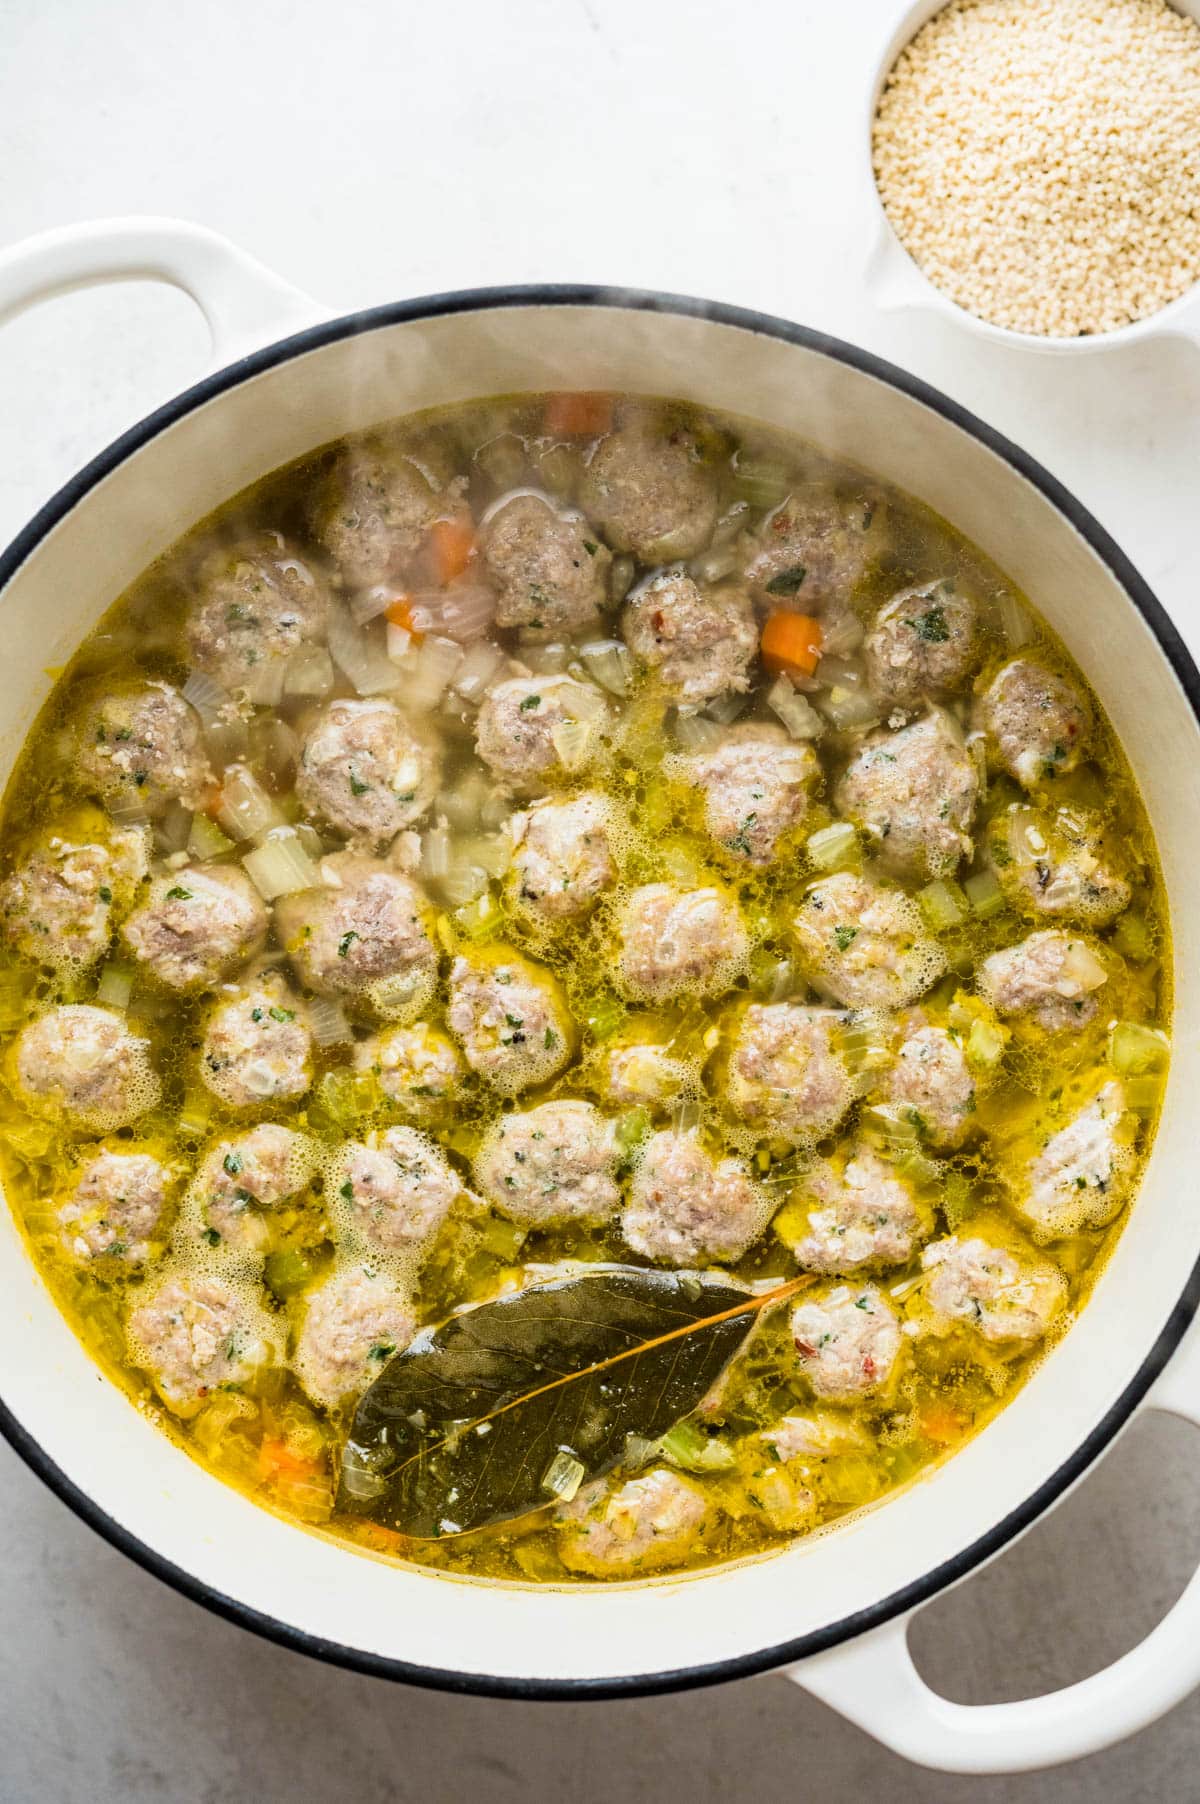 simmer the meatballs in stock. 